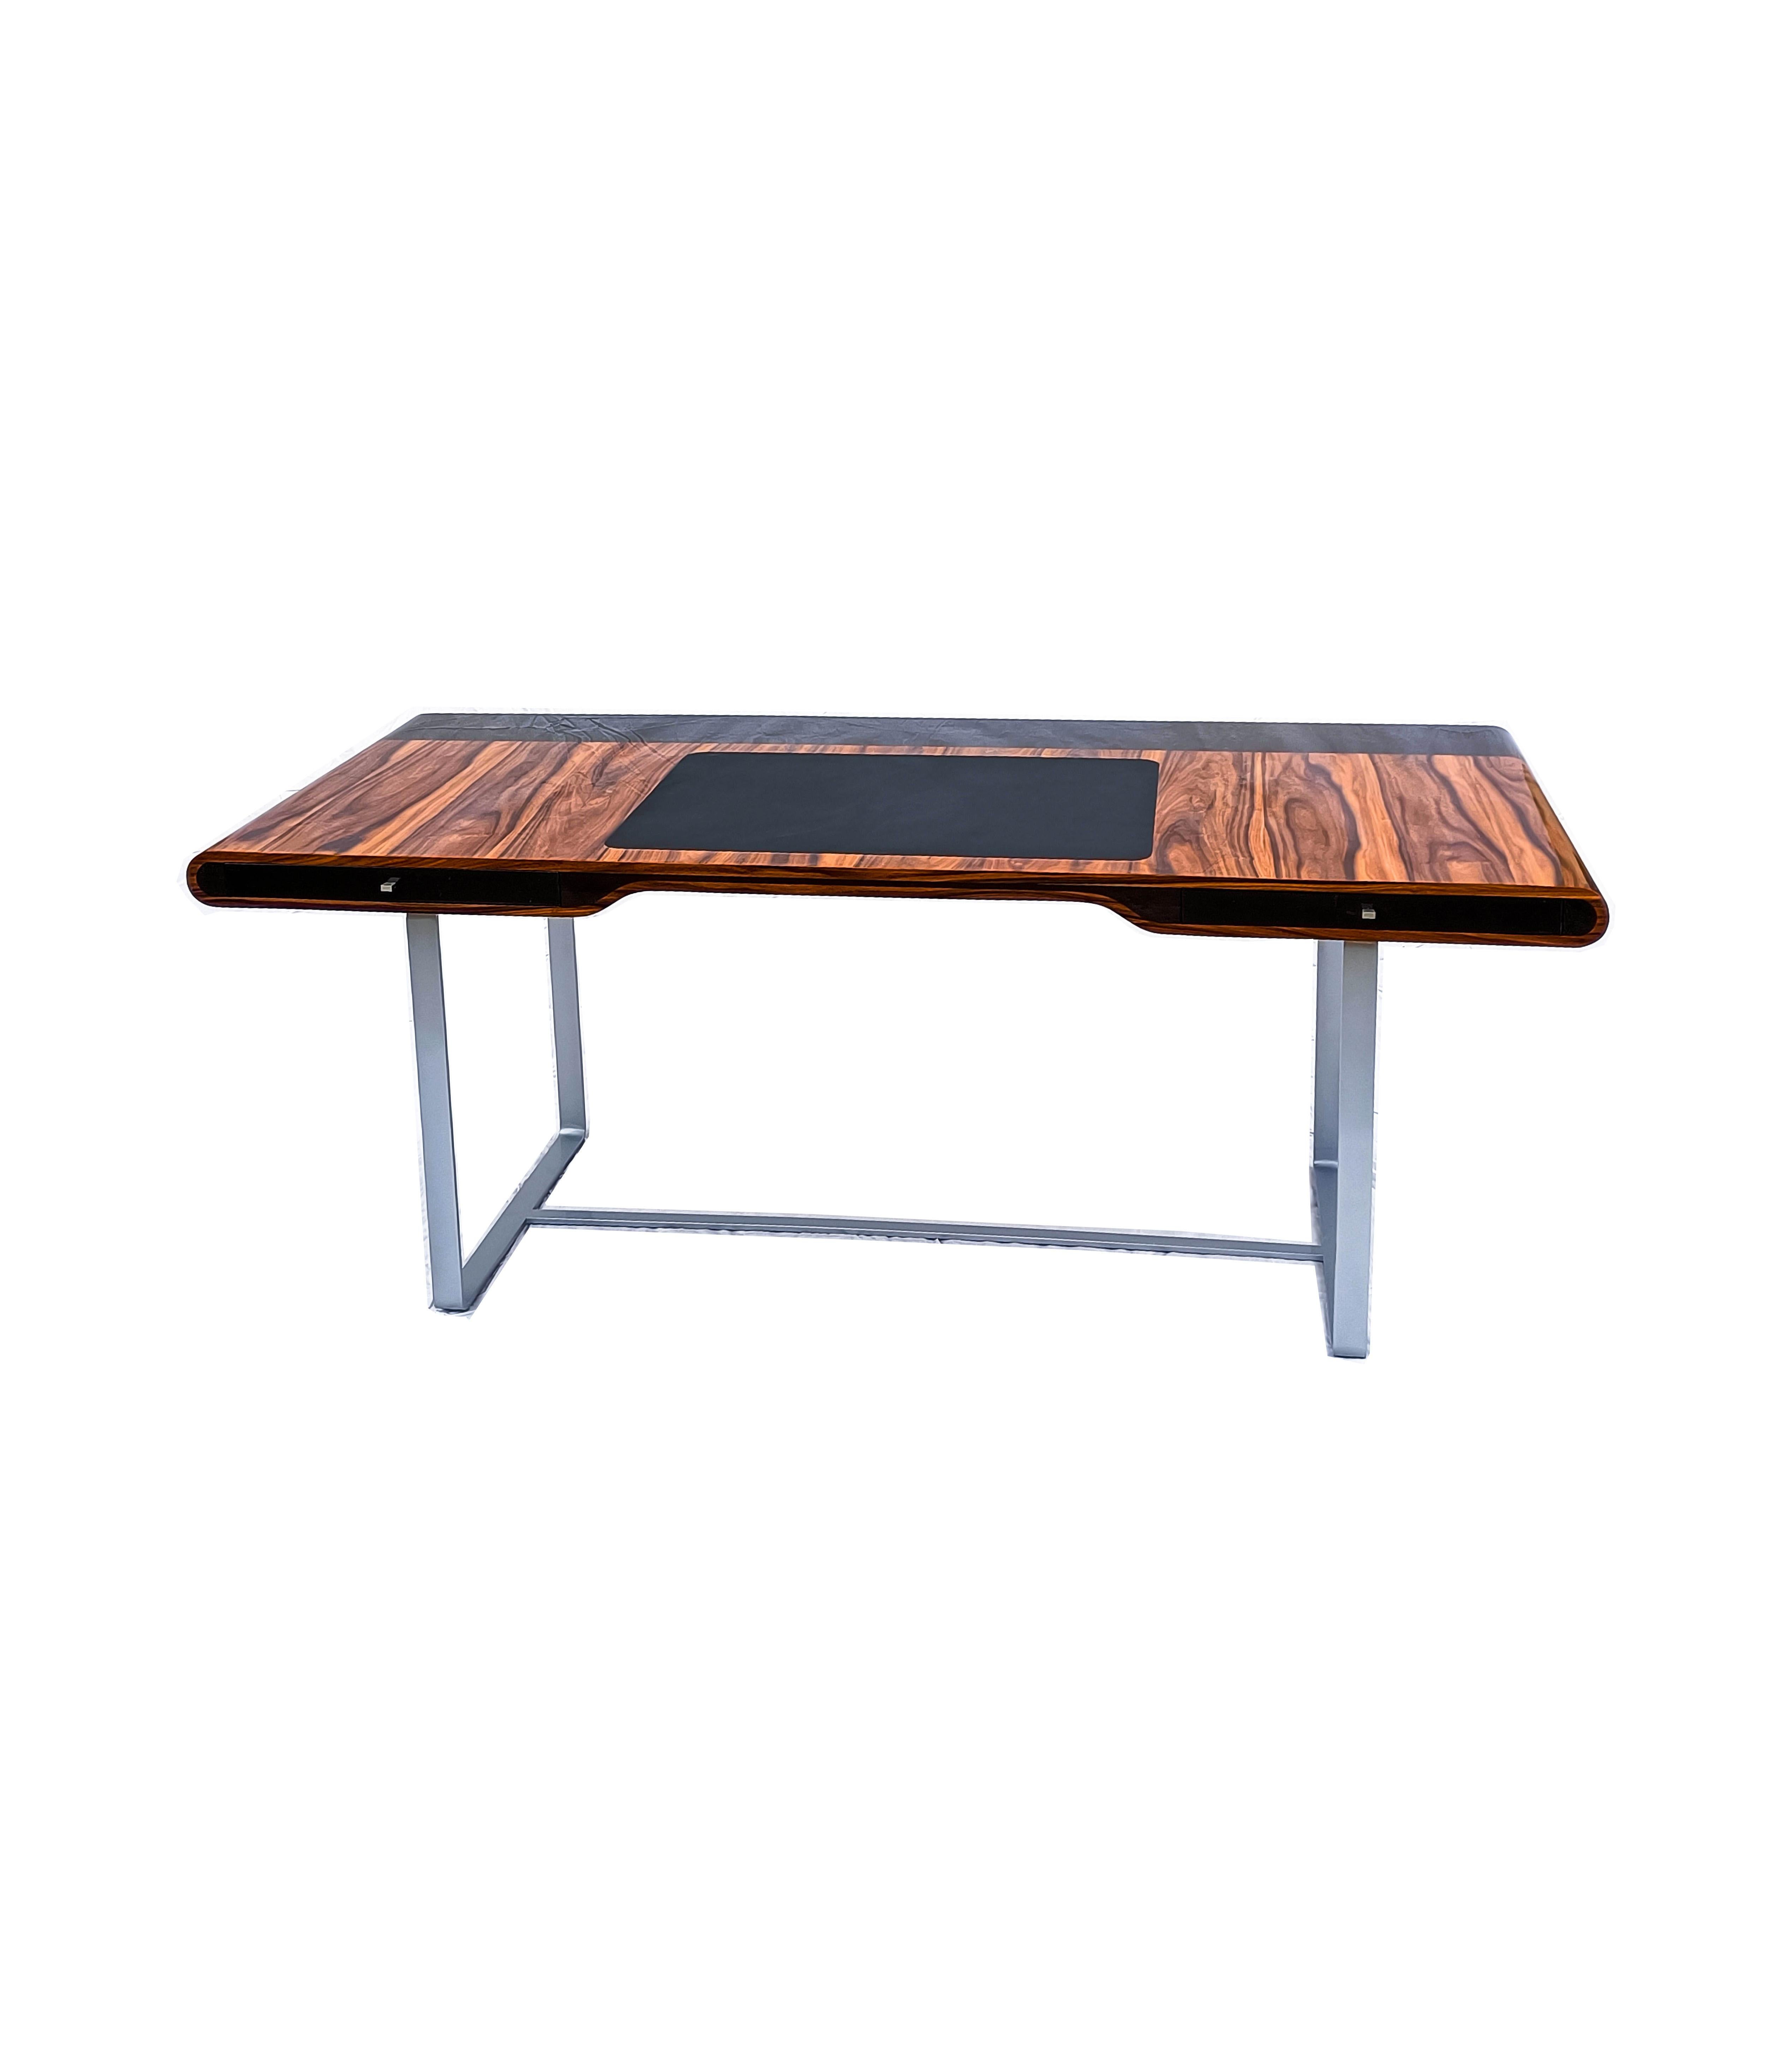 Little Shanghai desk in santos wood and black saycomore silver painted leg. There are two drawers on each side.
This desk is hand build in or workshop in Paris and can be made in other dimensions or finish.
PLease ask for a shipping quote to get